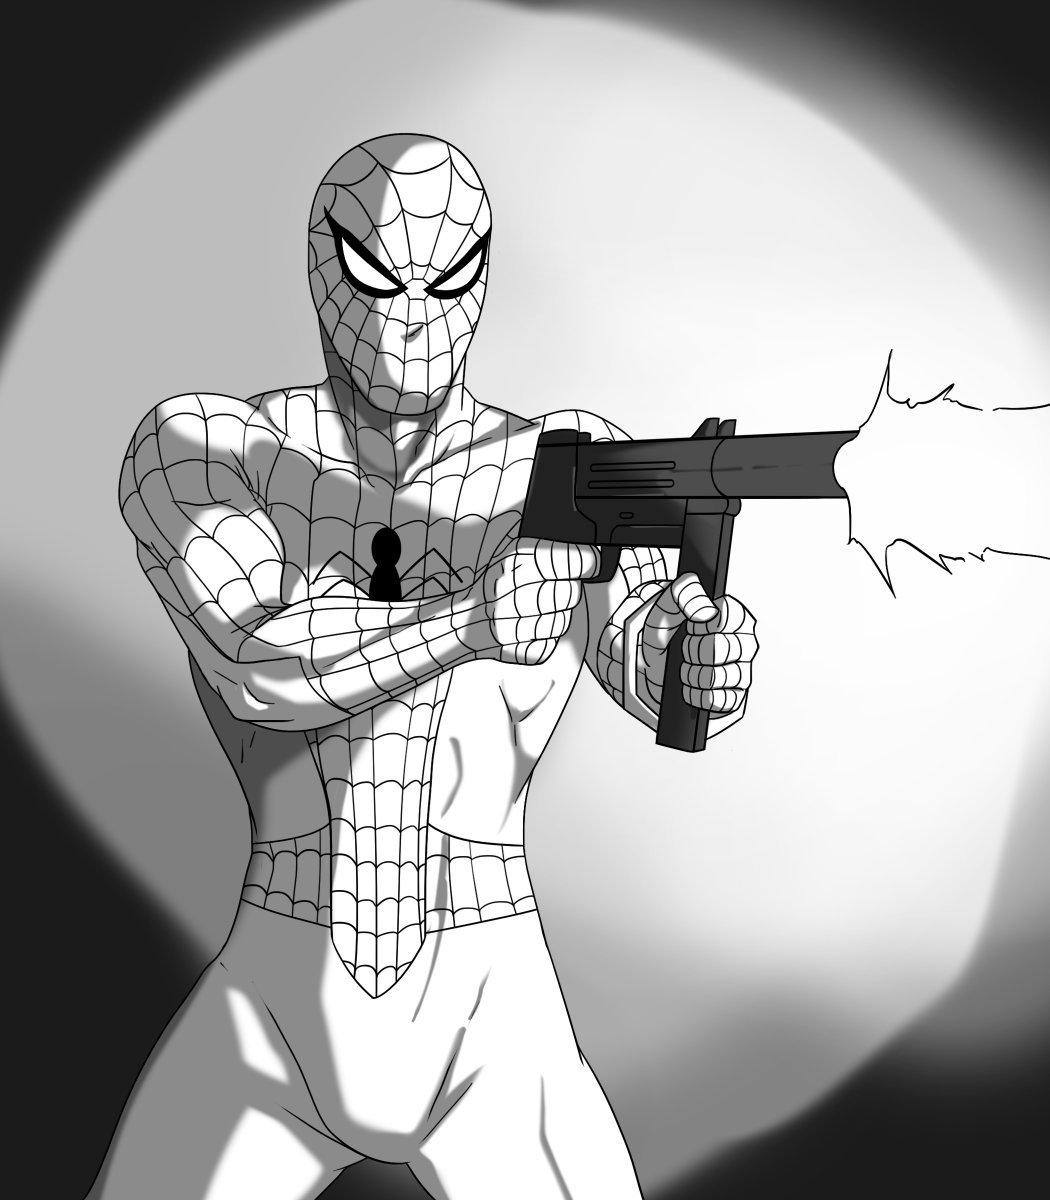 RT @Toastiepumpkin: #Inktober Day 29, Uh Oh, it's the Emissary from Hell, Spider-Man! https://t.co/qECDEJ7Lbz